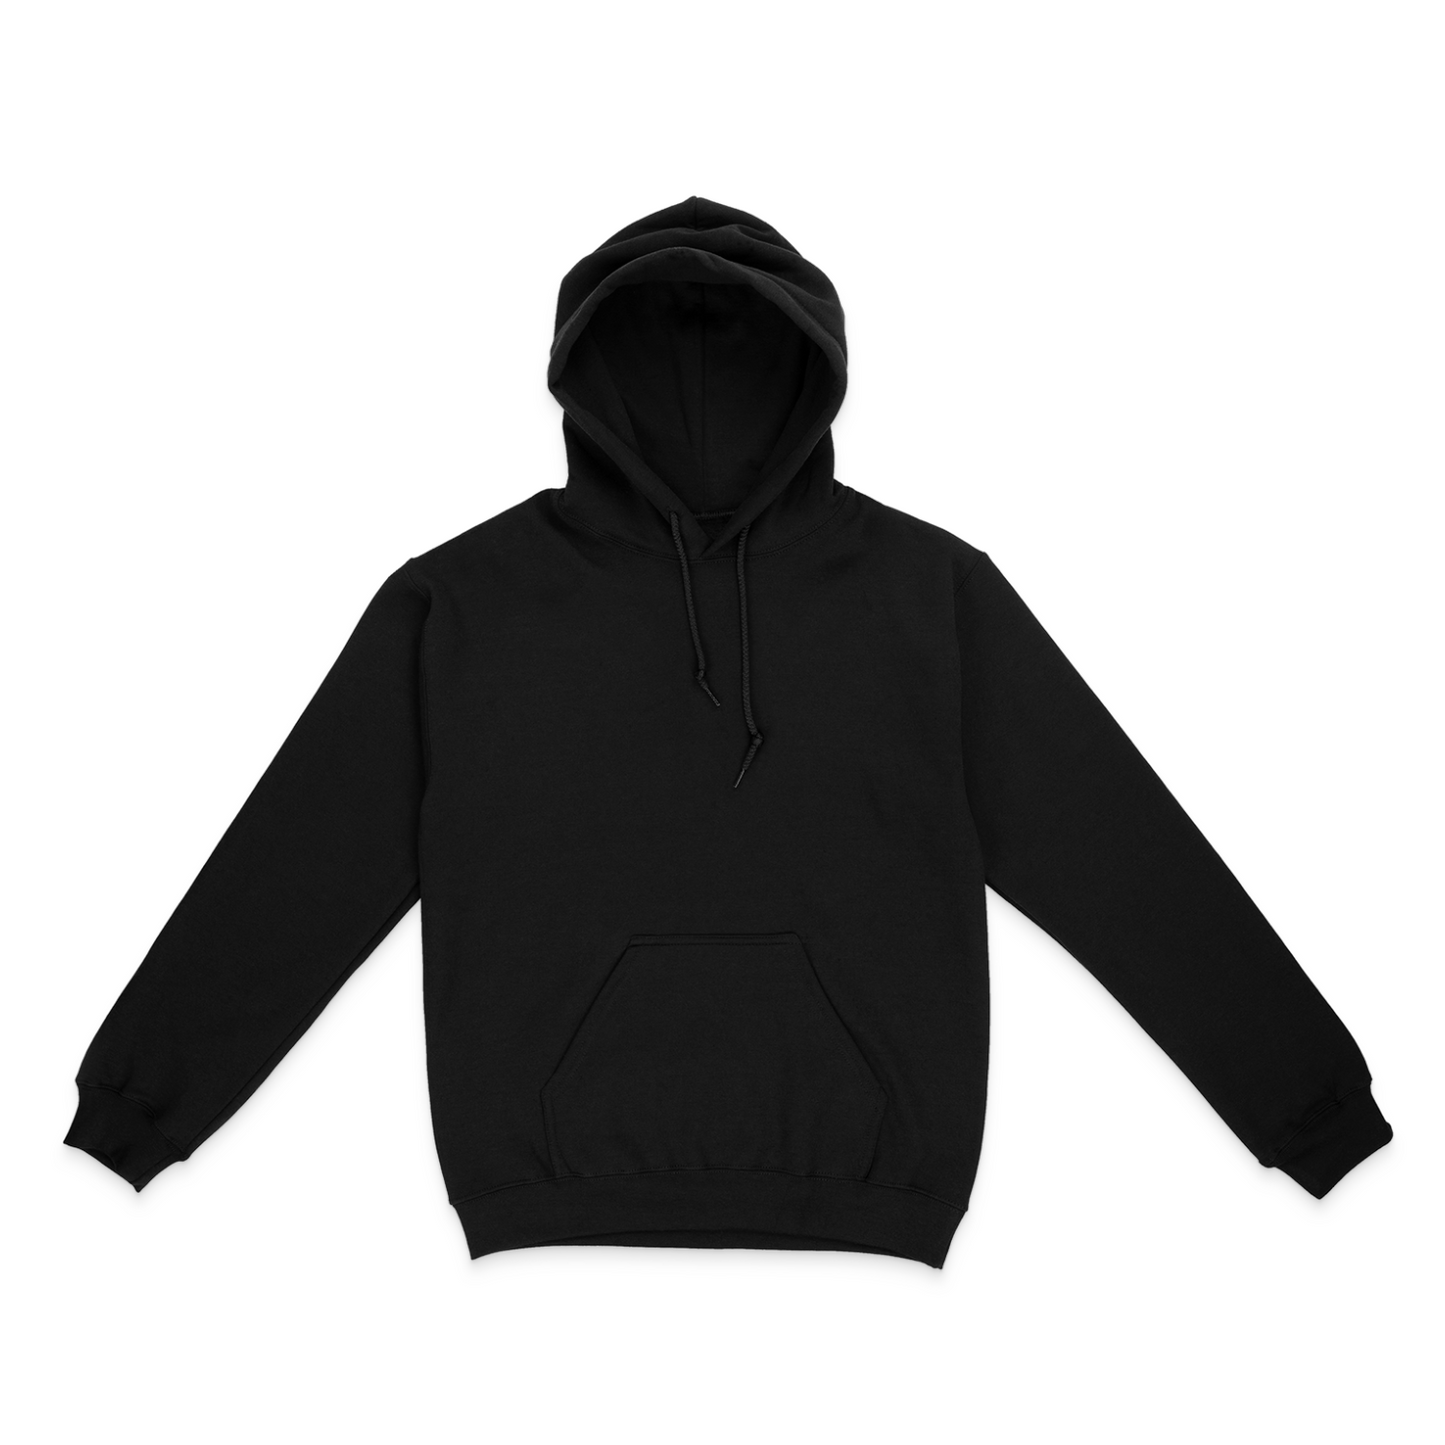 Outlined Photo Hoodie